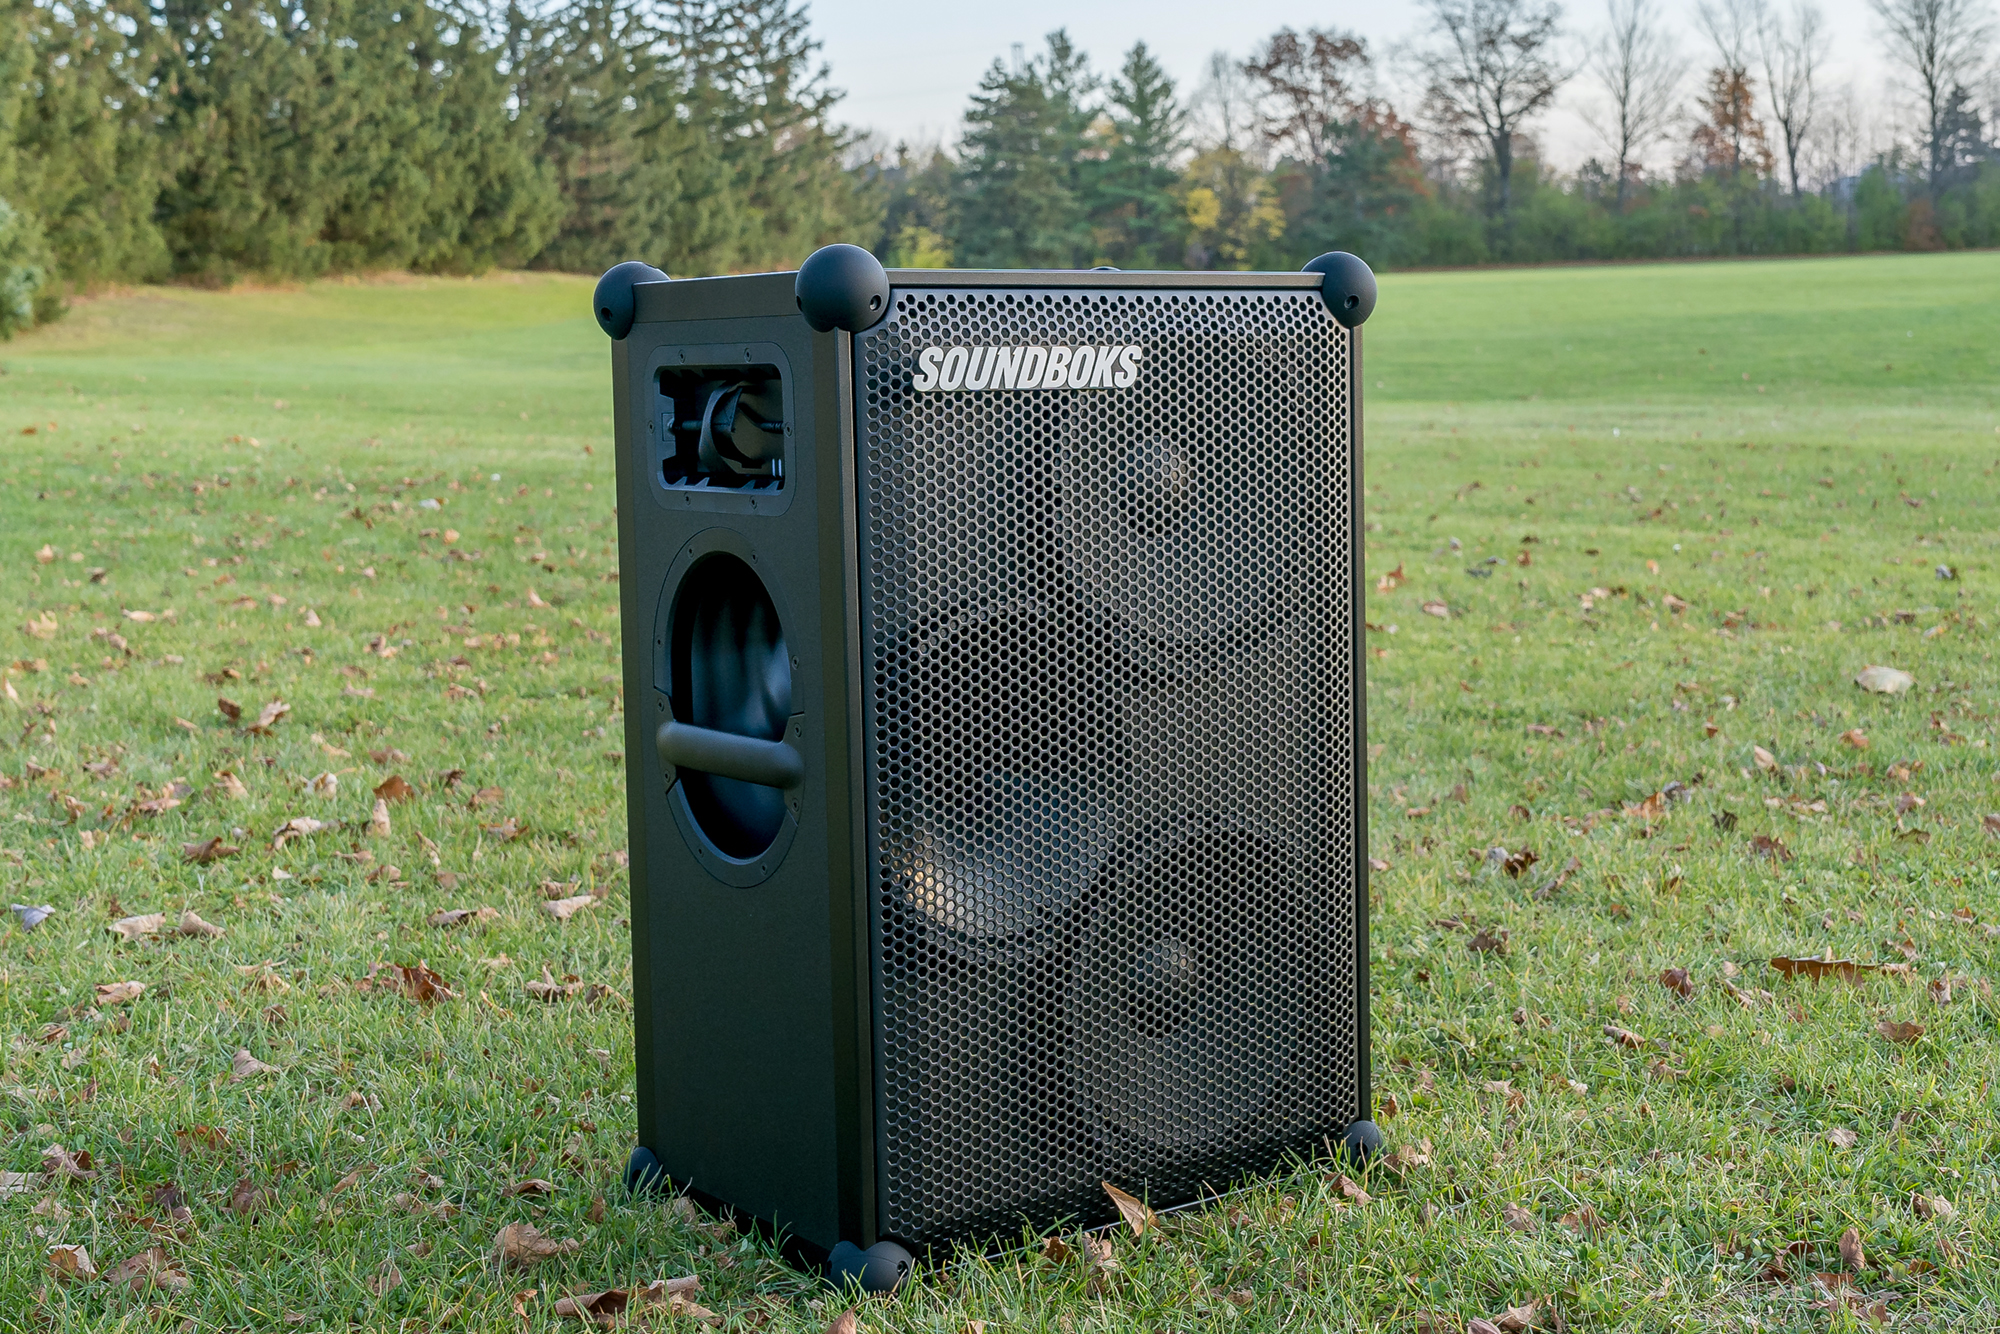 The Soundboks Speaker - Bluetooth-Enabled with 126 dB Output